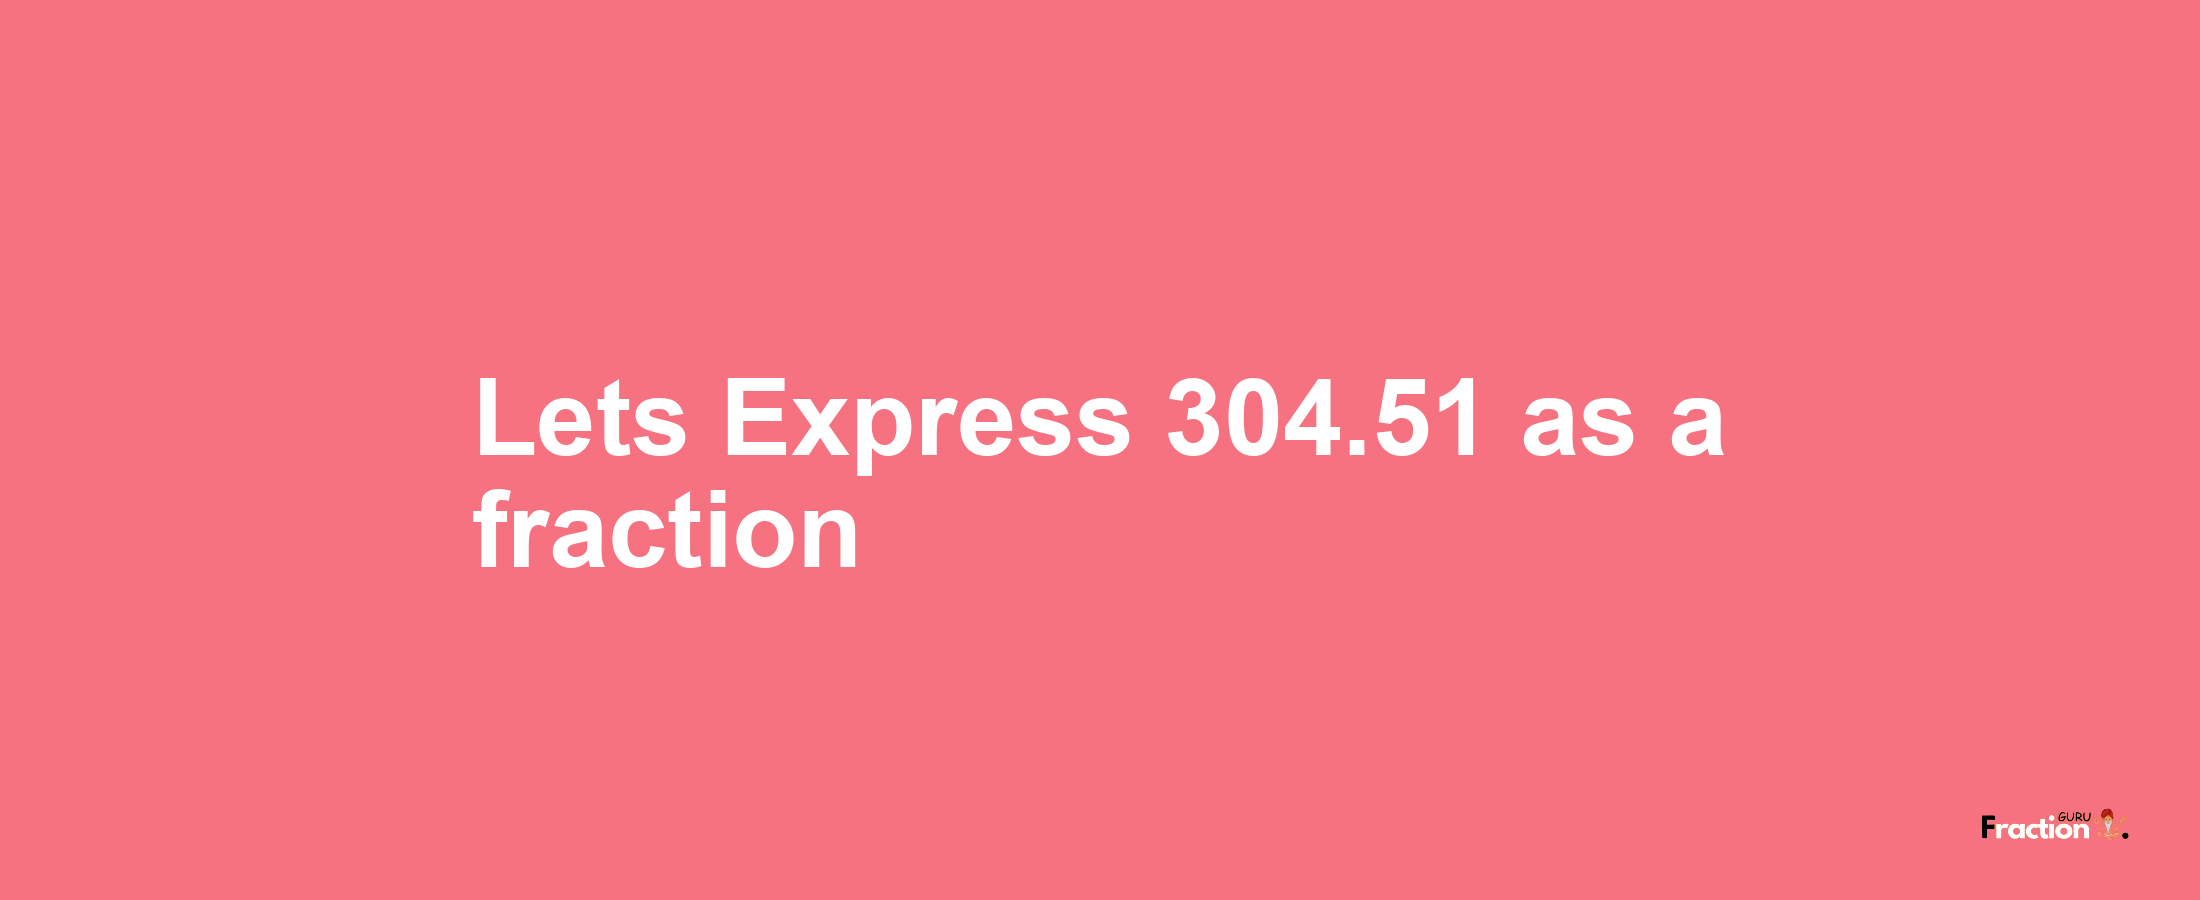 Lets Express 304.51 as afraction